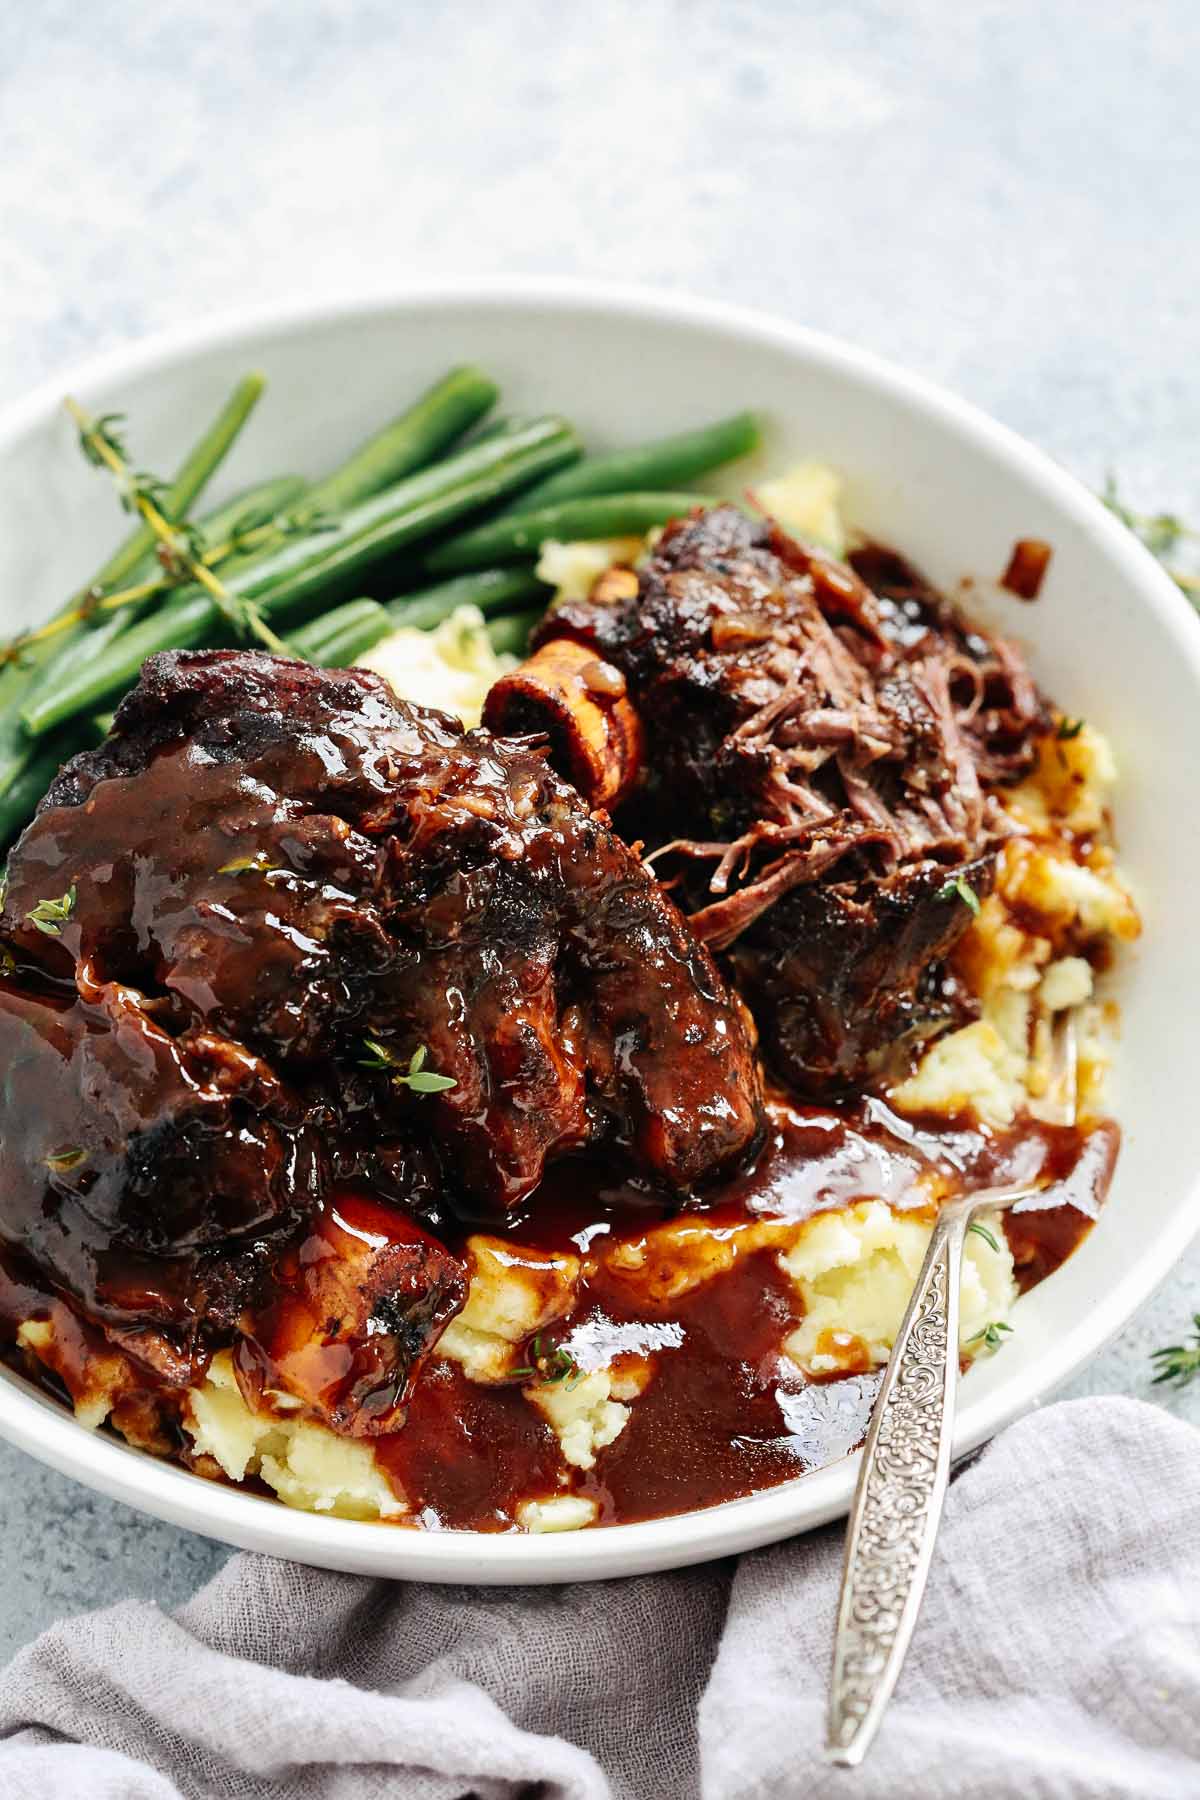 A close up of short ribs with green beans and mashed potatoes in a white bowl